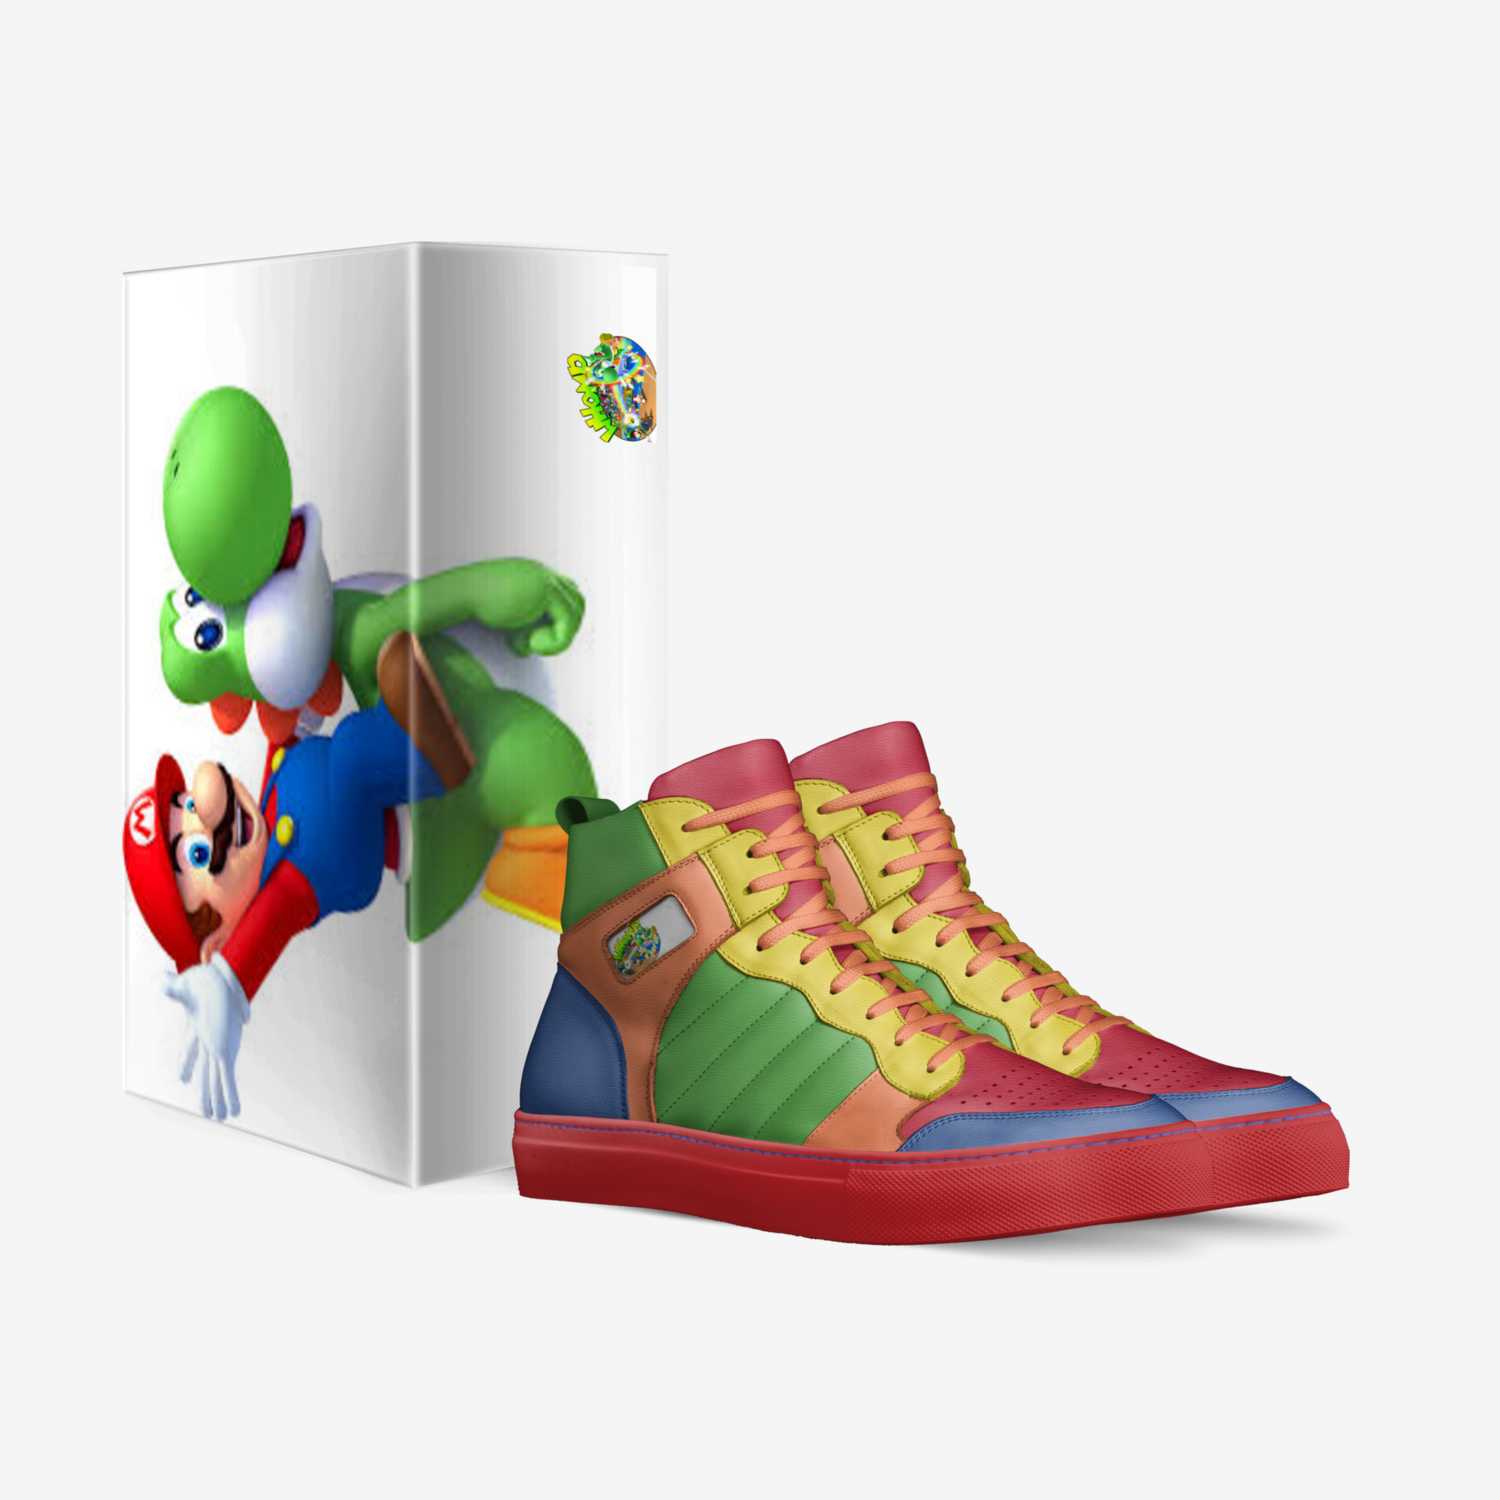 mario custom made in Italy shoes by Ryan | Box view